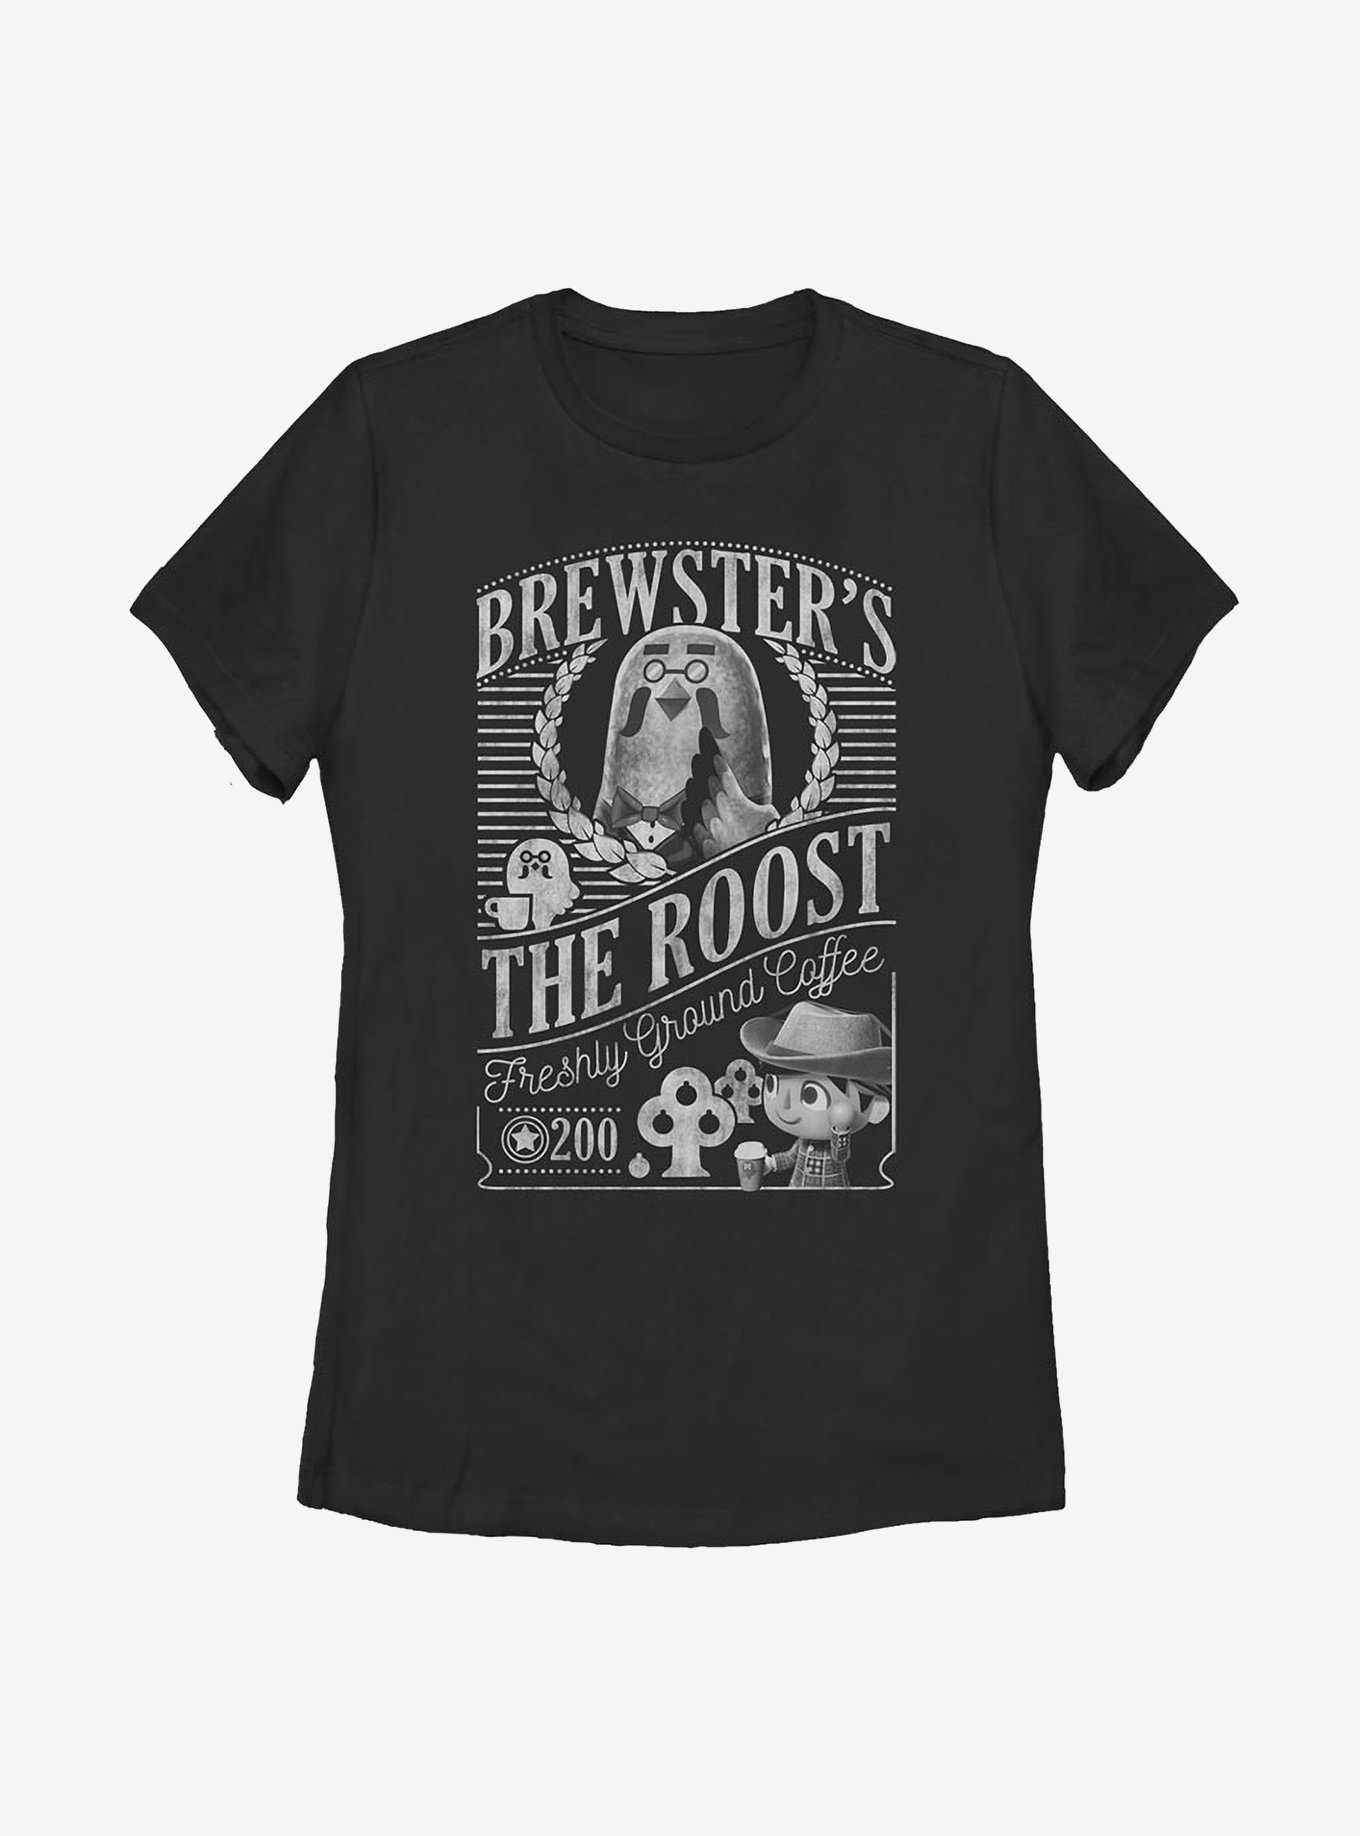 Animal Crossing Brewster's Cafe The Roost Womens T-Shirt, , hi-res